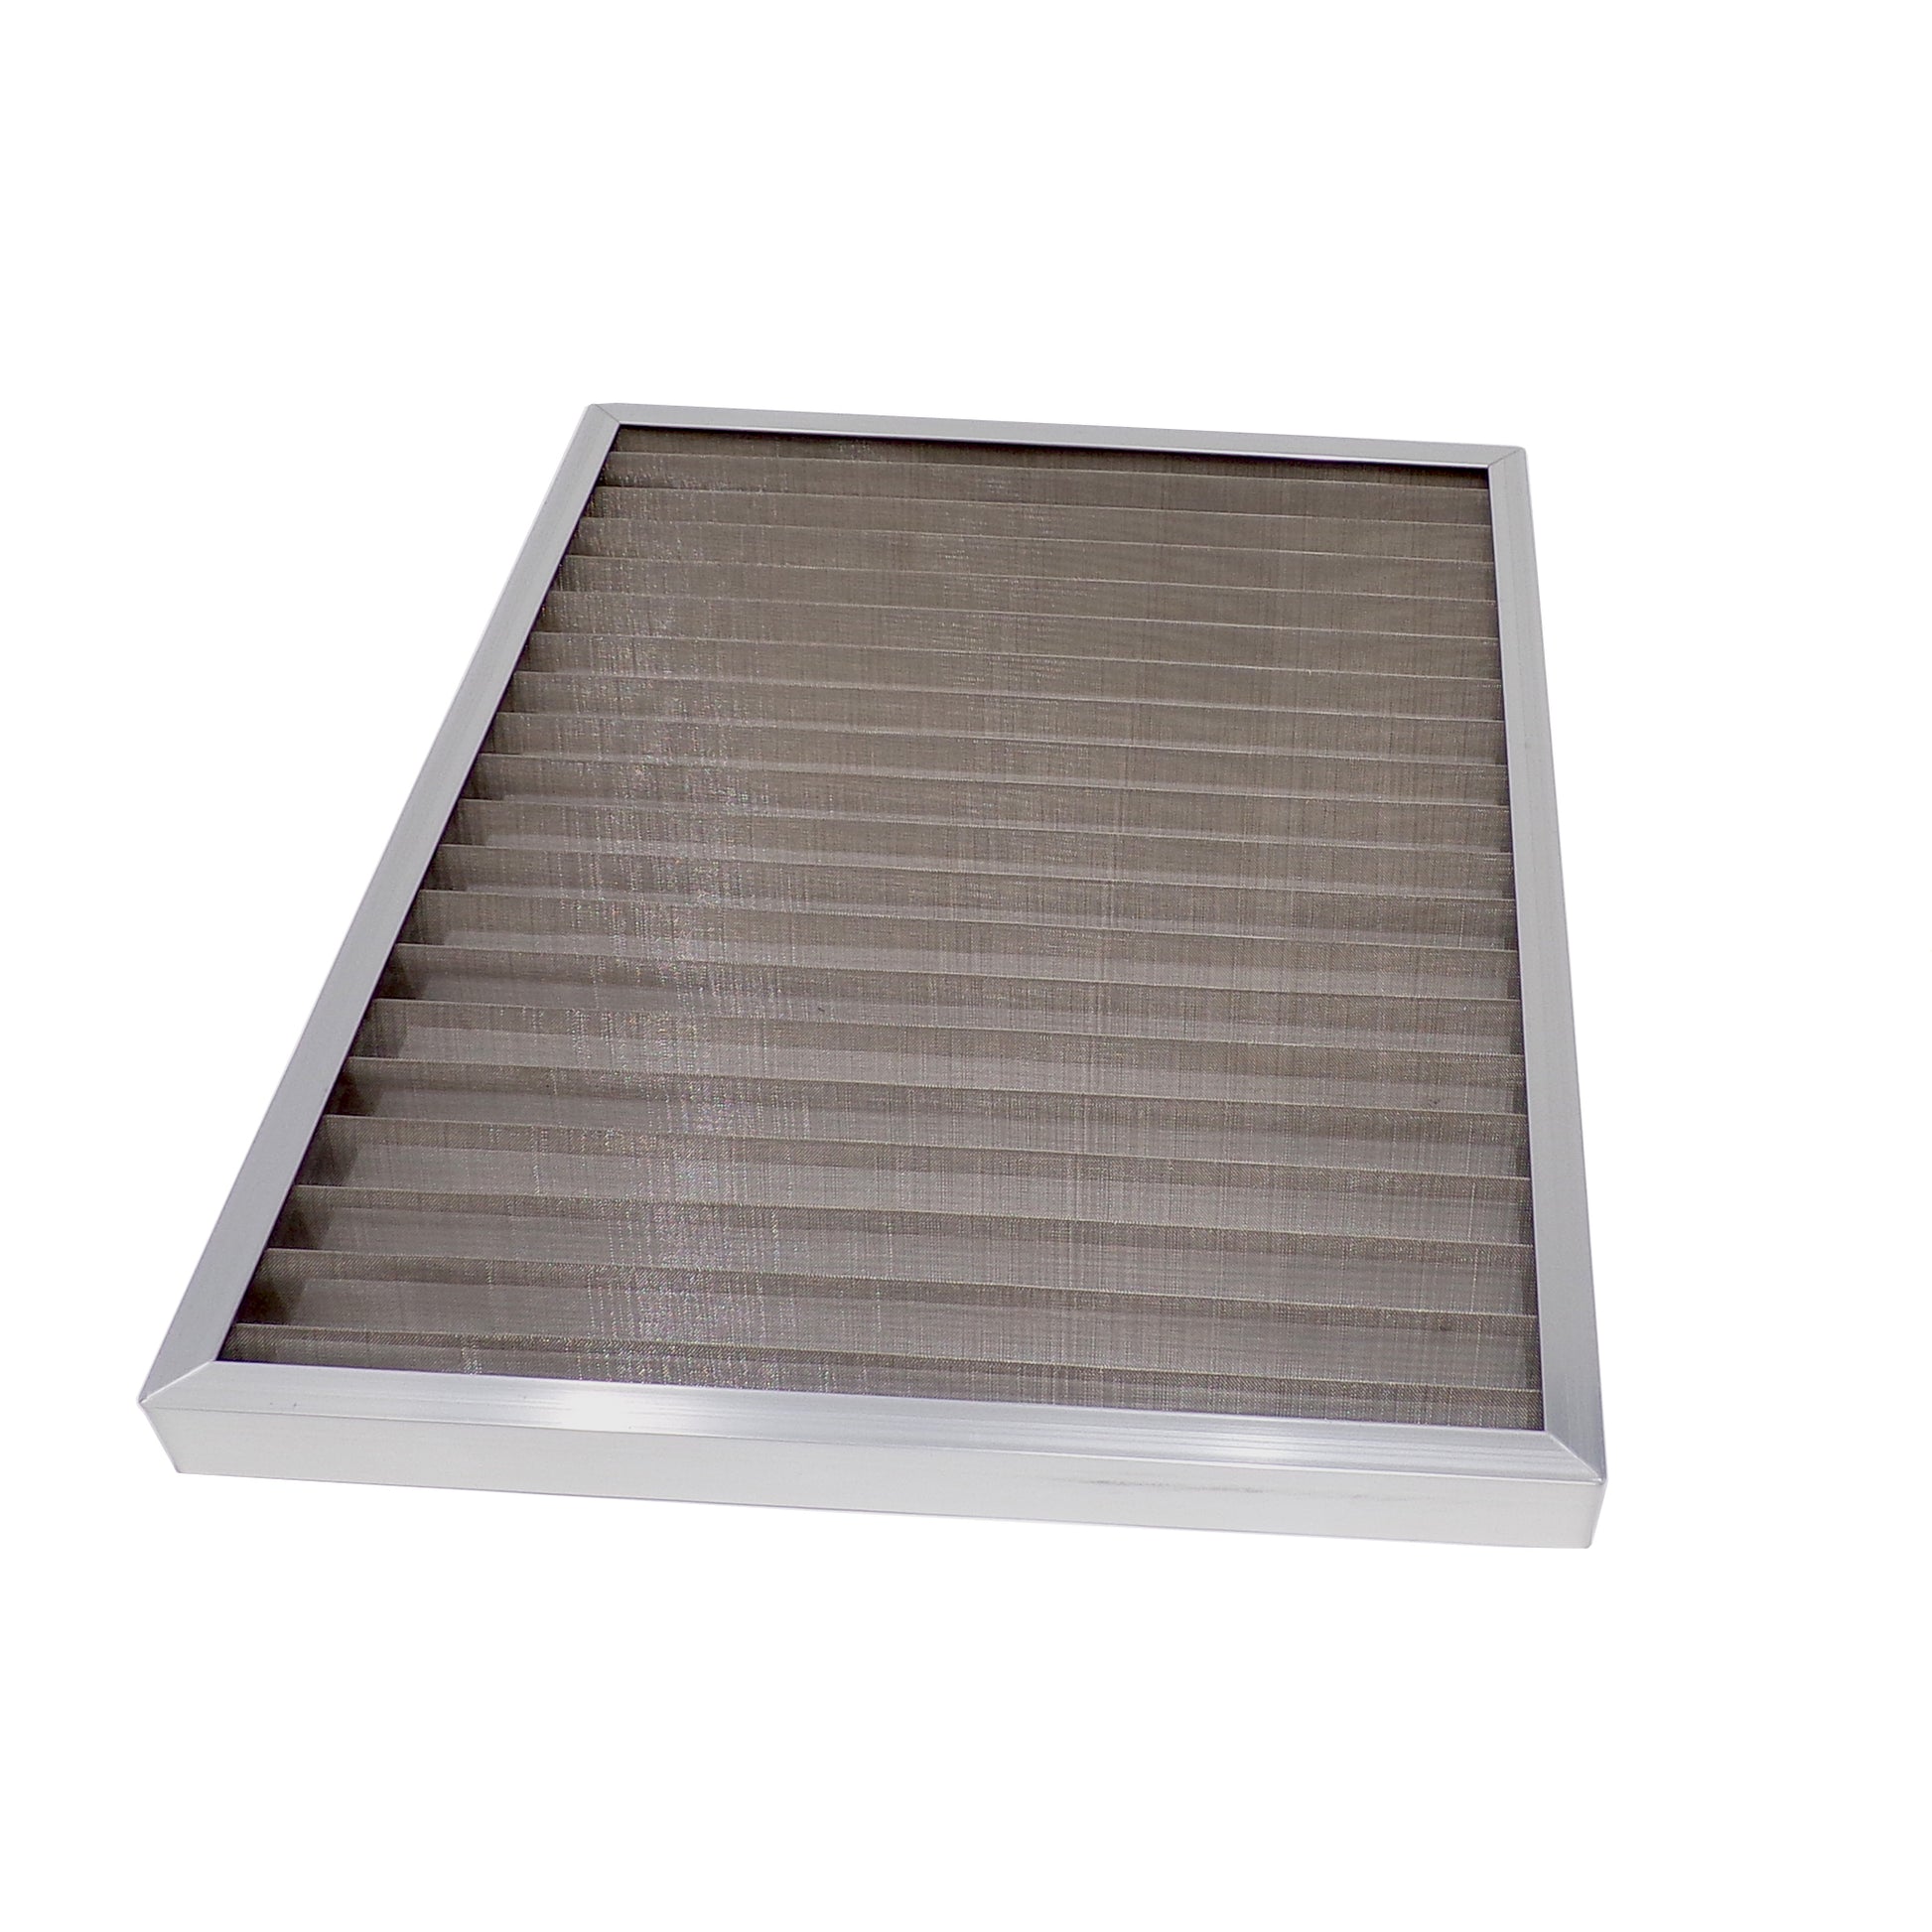 Primary Intake Stainless Filter for XPOWER LGR Dehumidifiers 